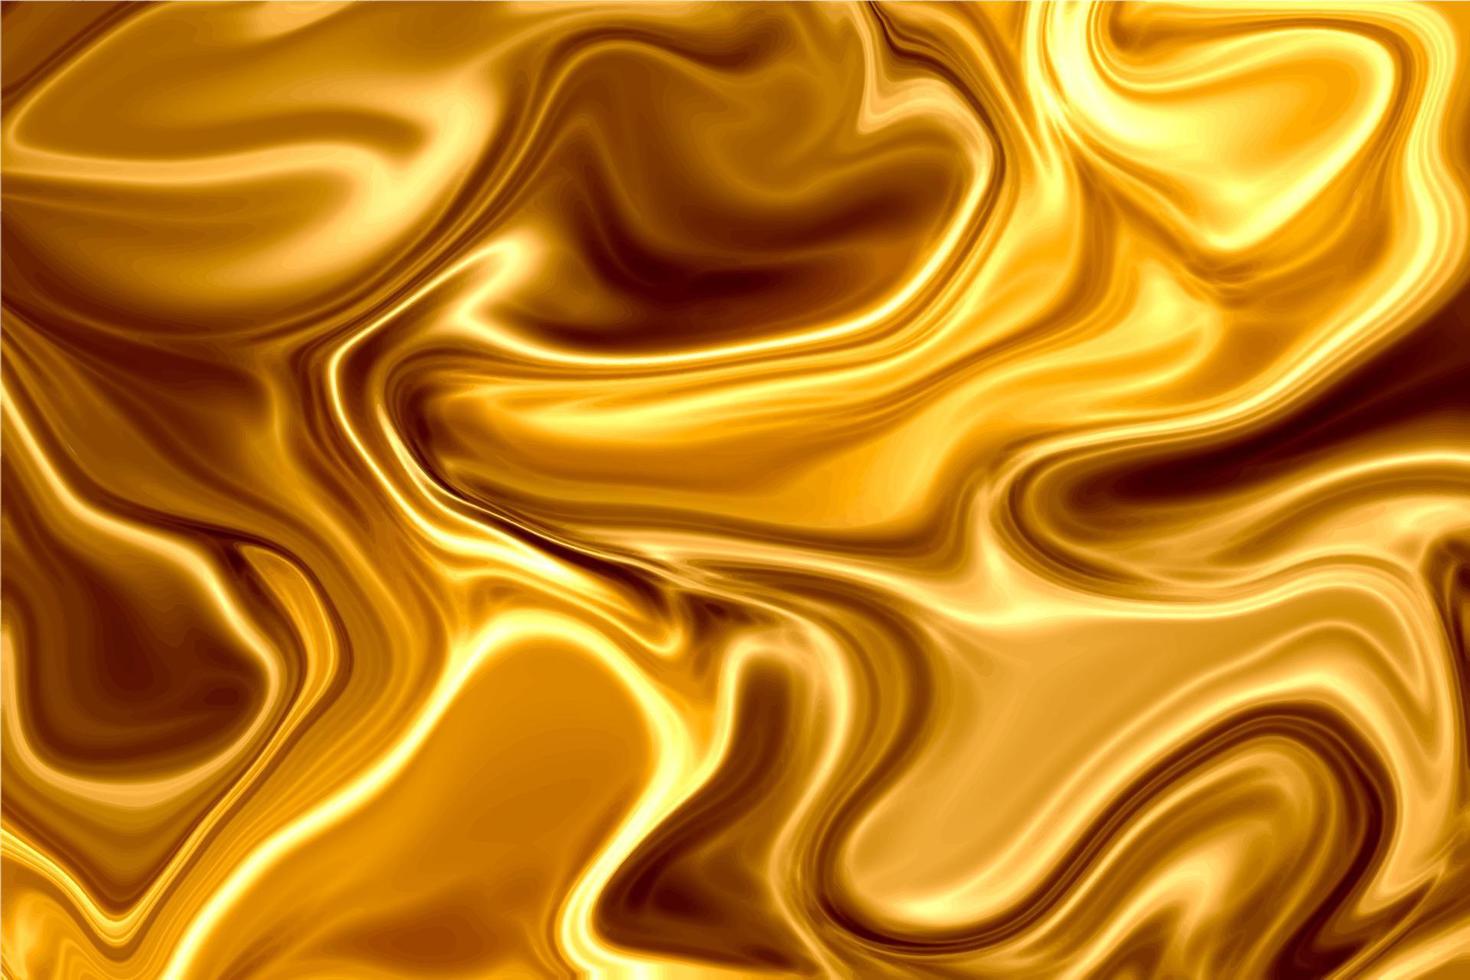 Abstract background elegant silk texture satin luxury gold cloth wavy folds. Vector templates collection for brochures, posters, banners, flyers and cards etc